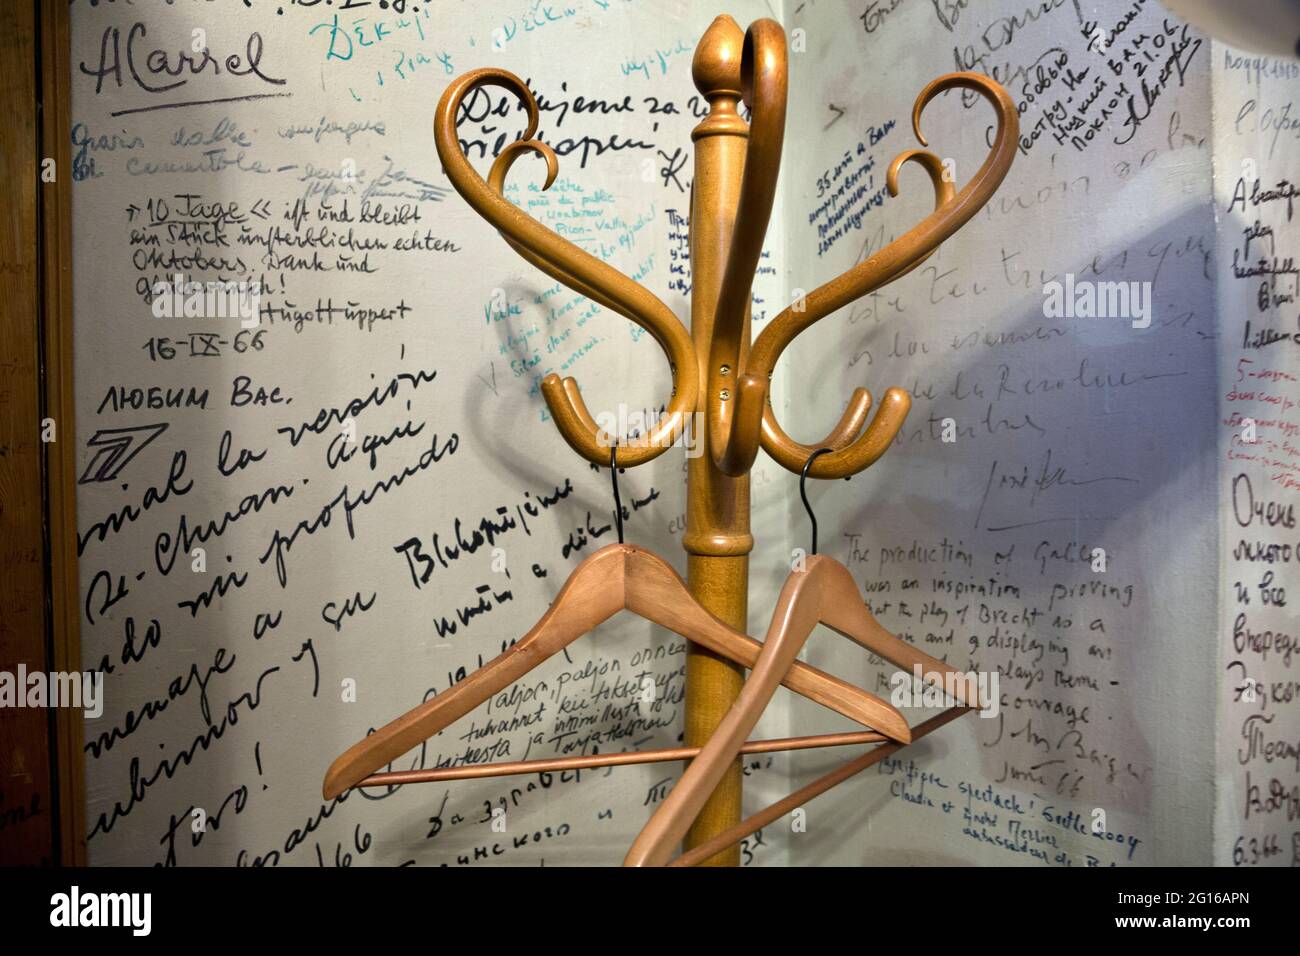 Moscow, Russia. 14th of February, 2014 An empty clothes hangers in the office of Yuri Petrovich Lyubimov against the background of inscriptions with wishes from famous people in the Taganka Theater in Moscow Stock Photo